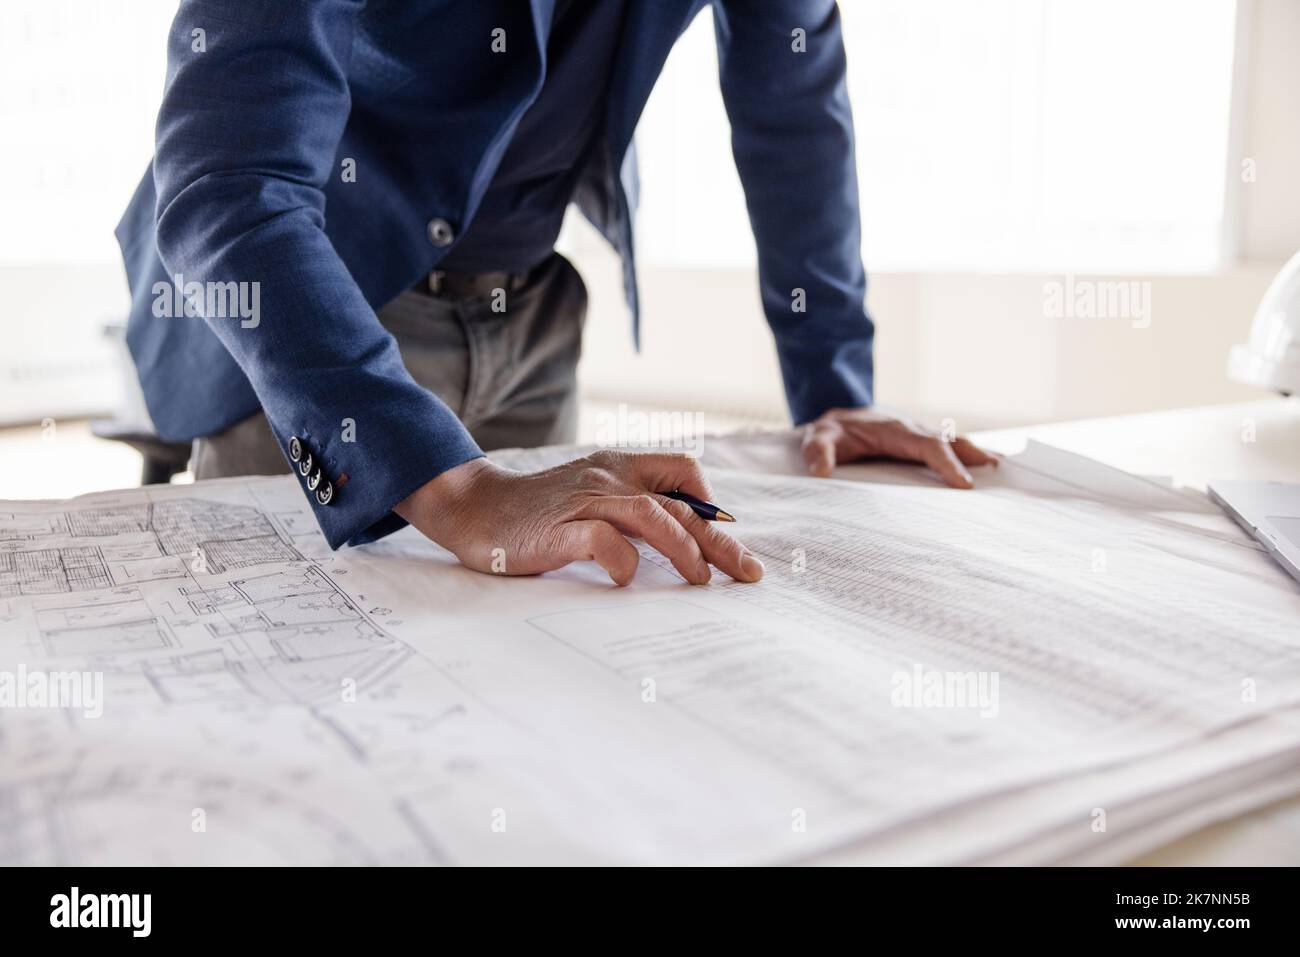 Man working on plan of building interior Stock Photo